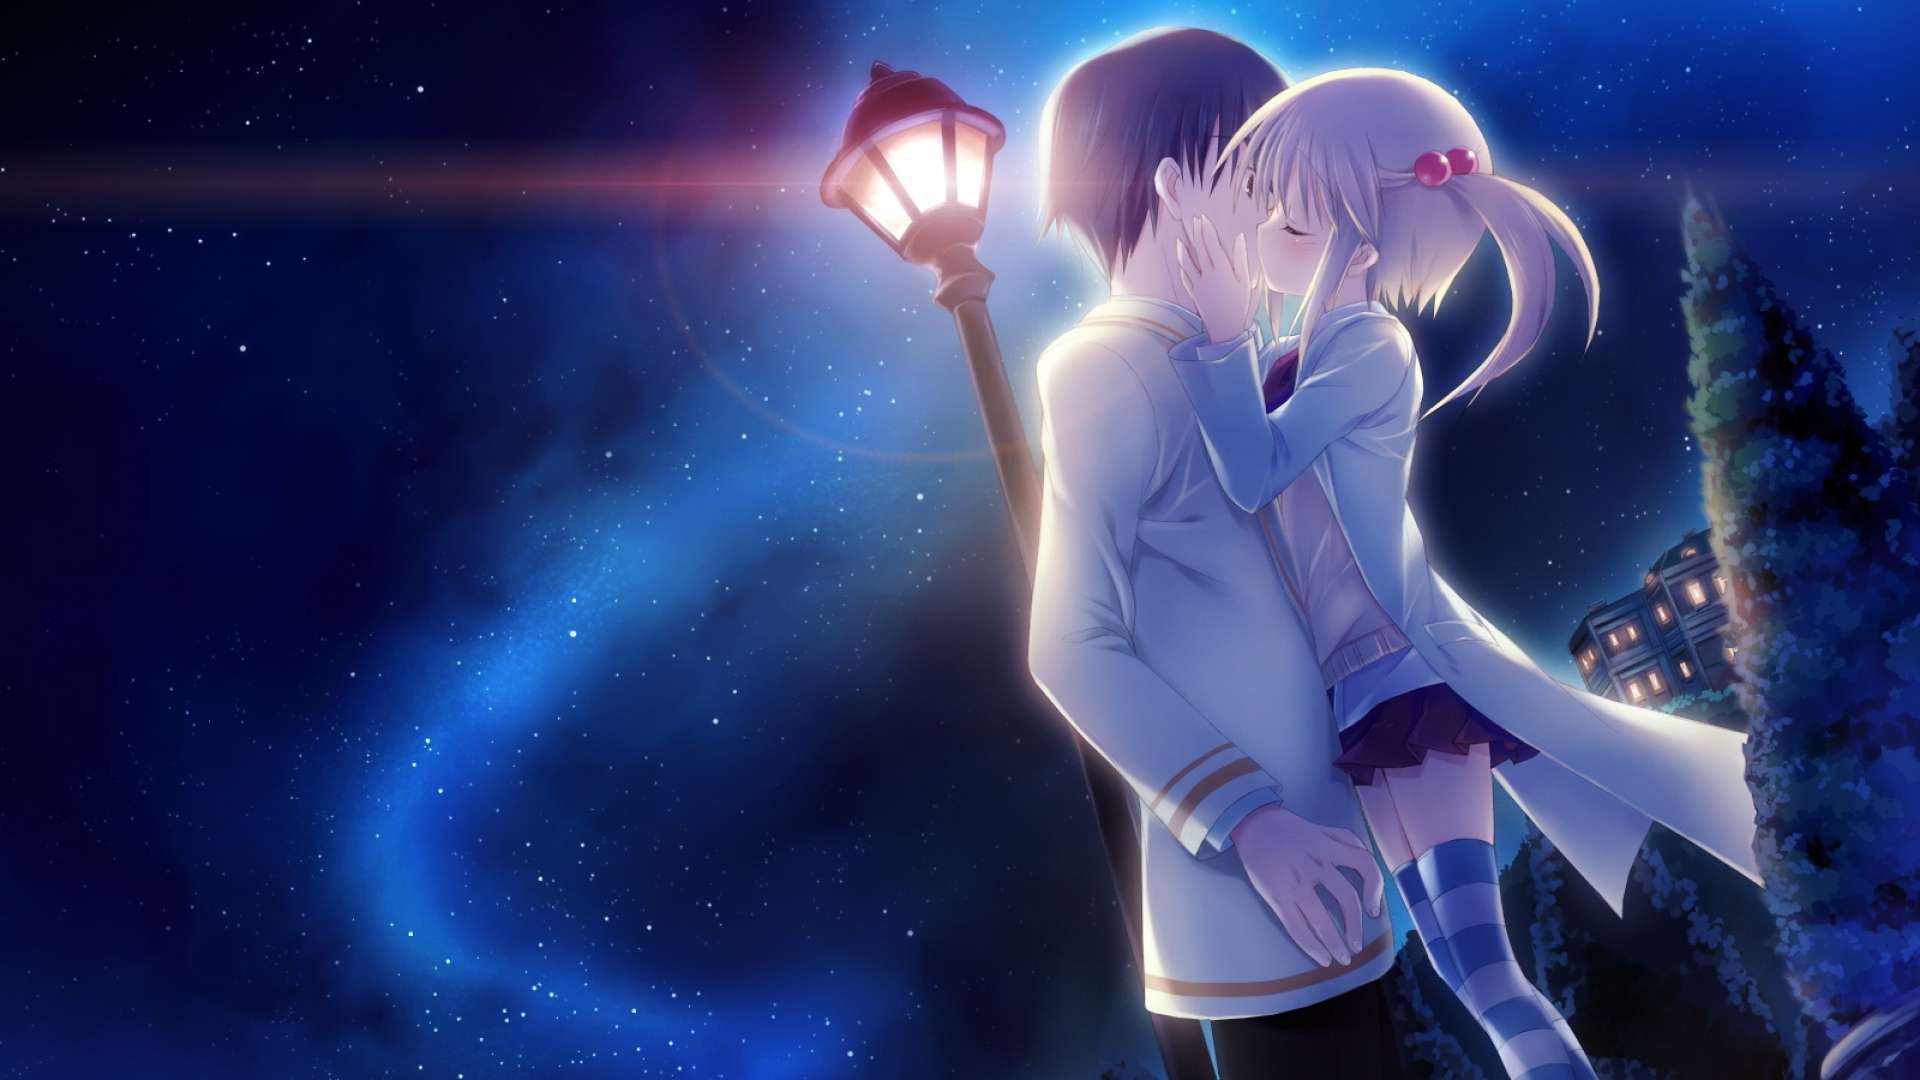 Anime Girl And Boy Kiss Valentines Day Wallpapers